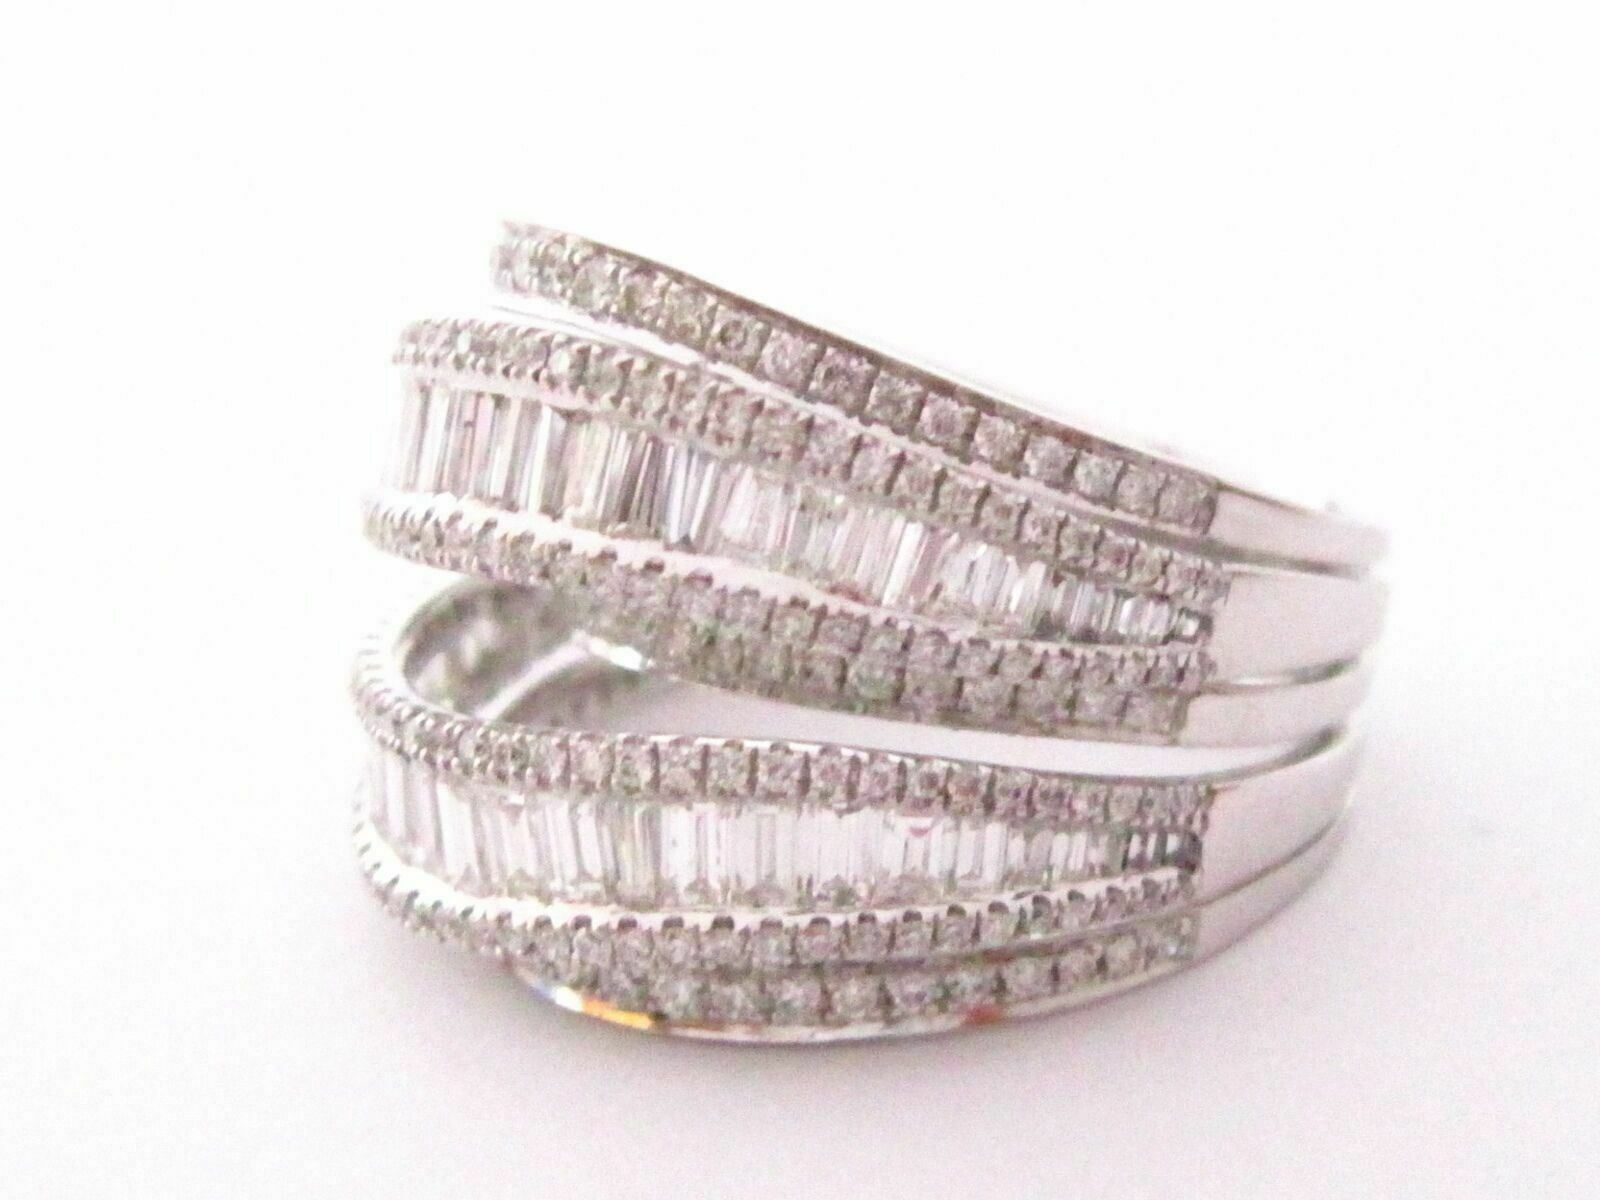 2.00 TCW Round & Baguette Diamonds Cocktail Ring Size 7 G VS2 18k White Gold